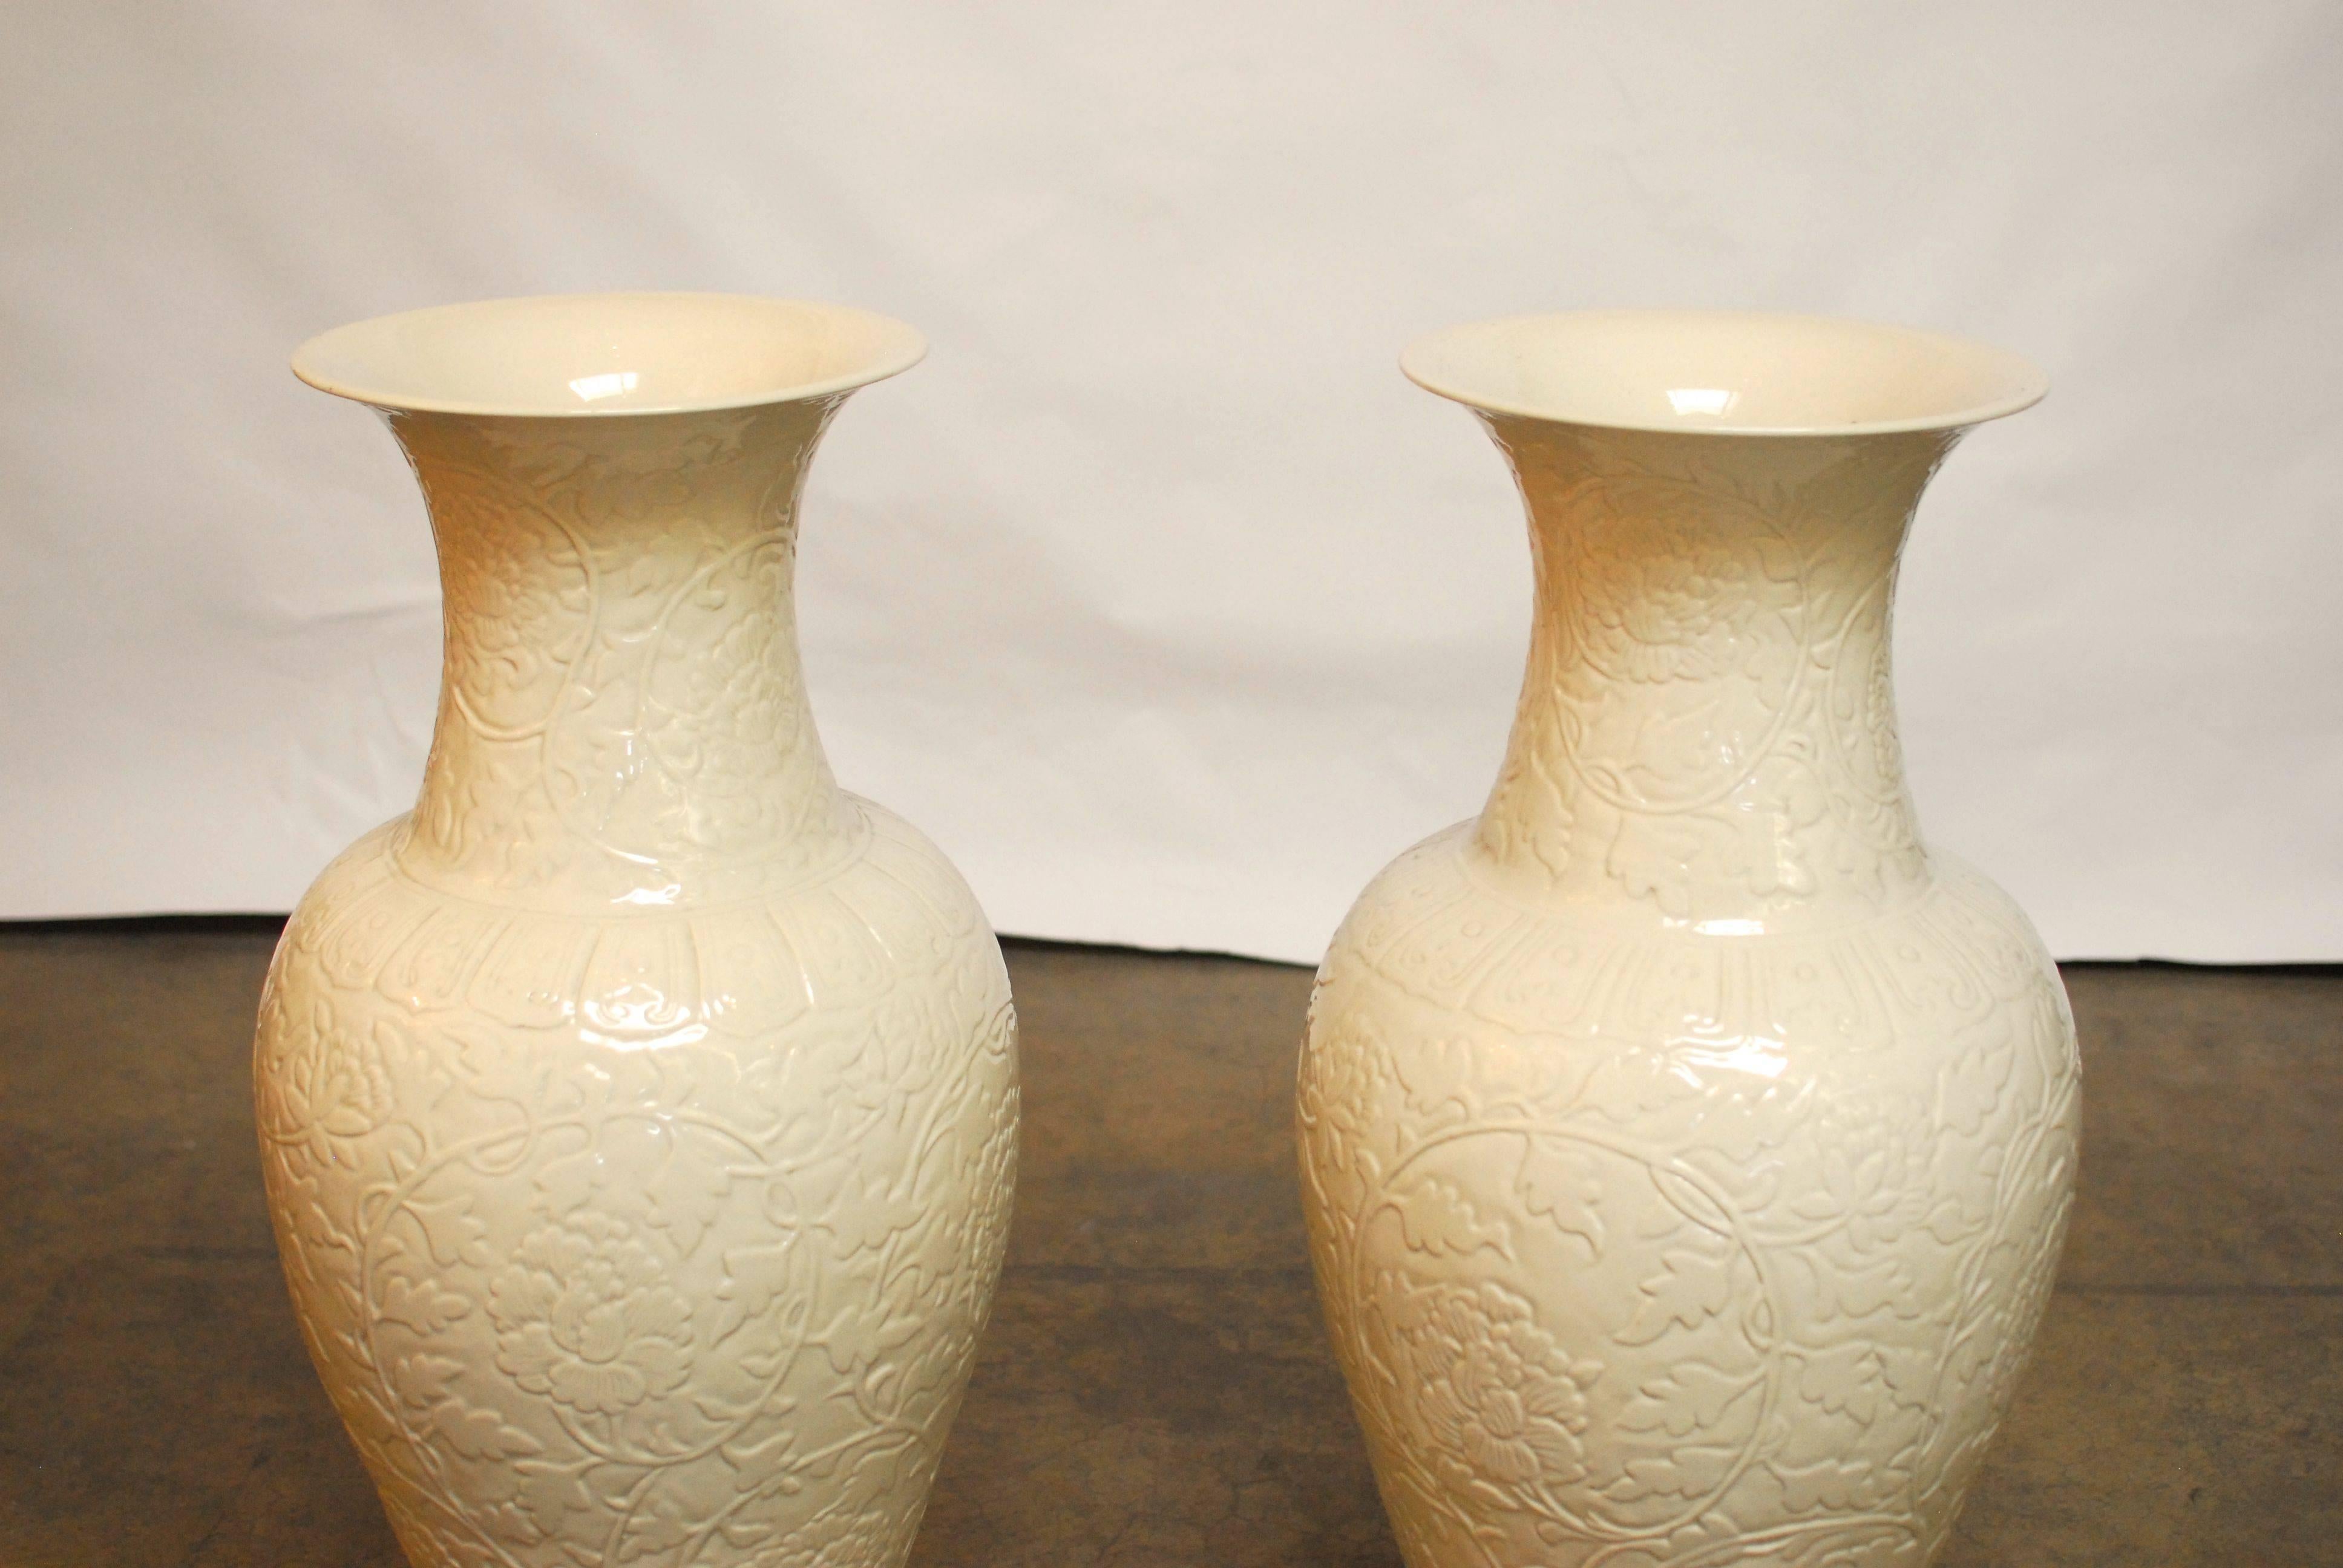 Pair of large, Blanc de chine porcelain vases featuring a trumpet neck and a foliate relief decorated body. Both incised with a flowering chrysanthemum plant on a monochromatic finish.